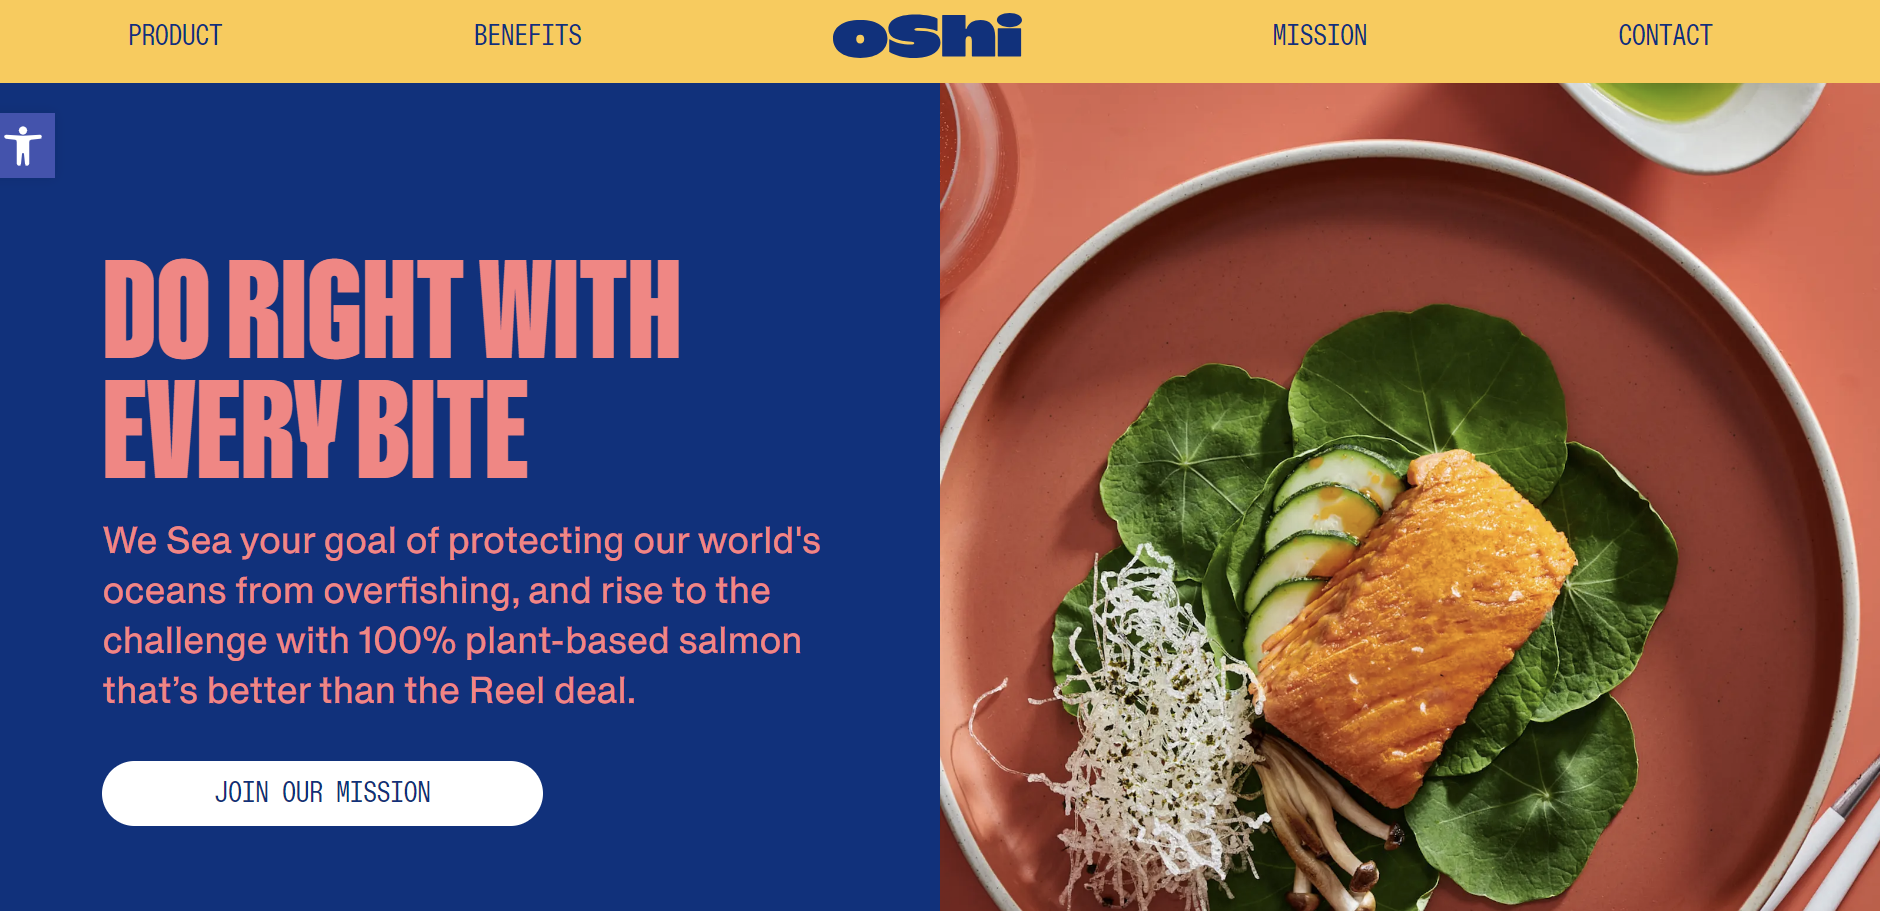 Oshi is a foodtech startup. Founded in Israel in 2021 under the name Plantish.